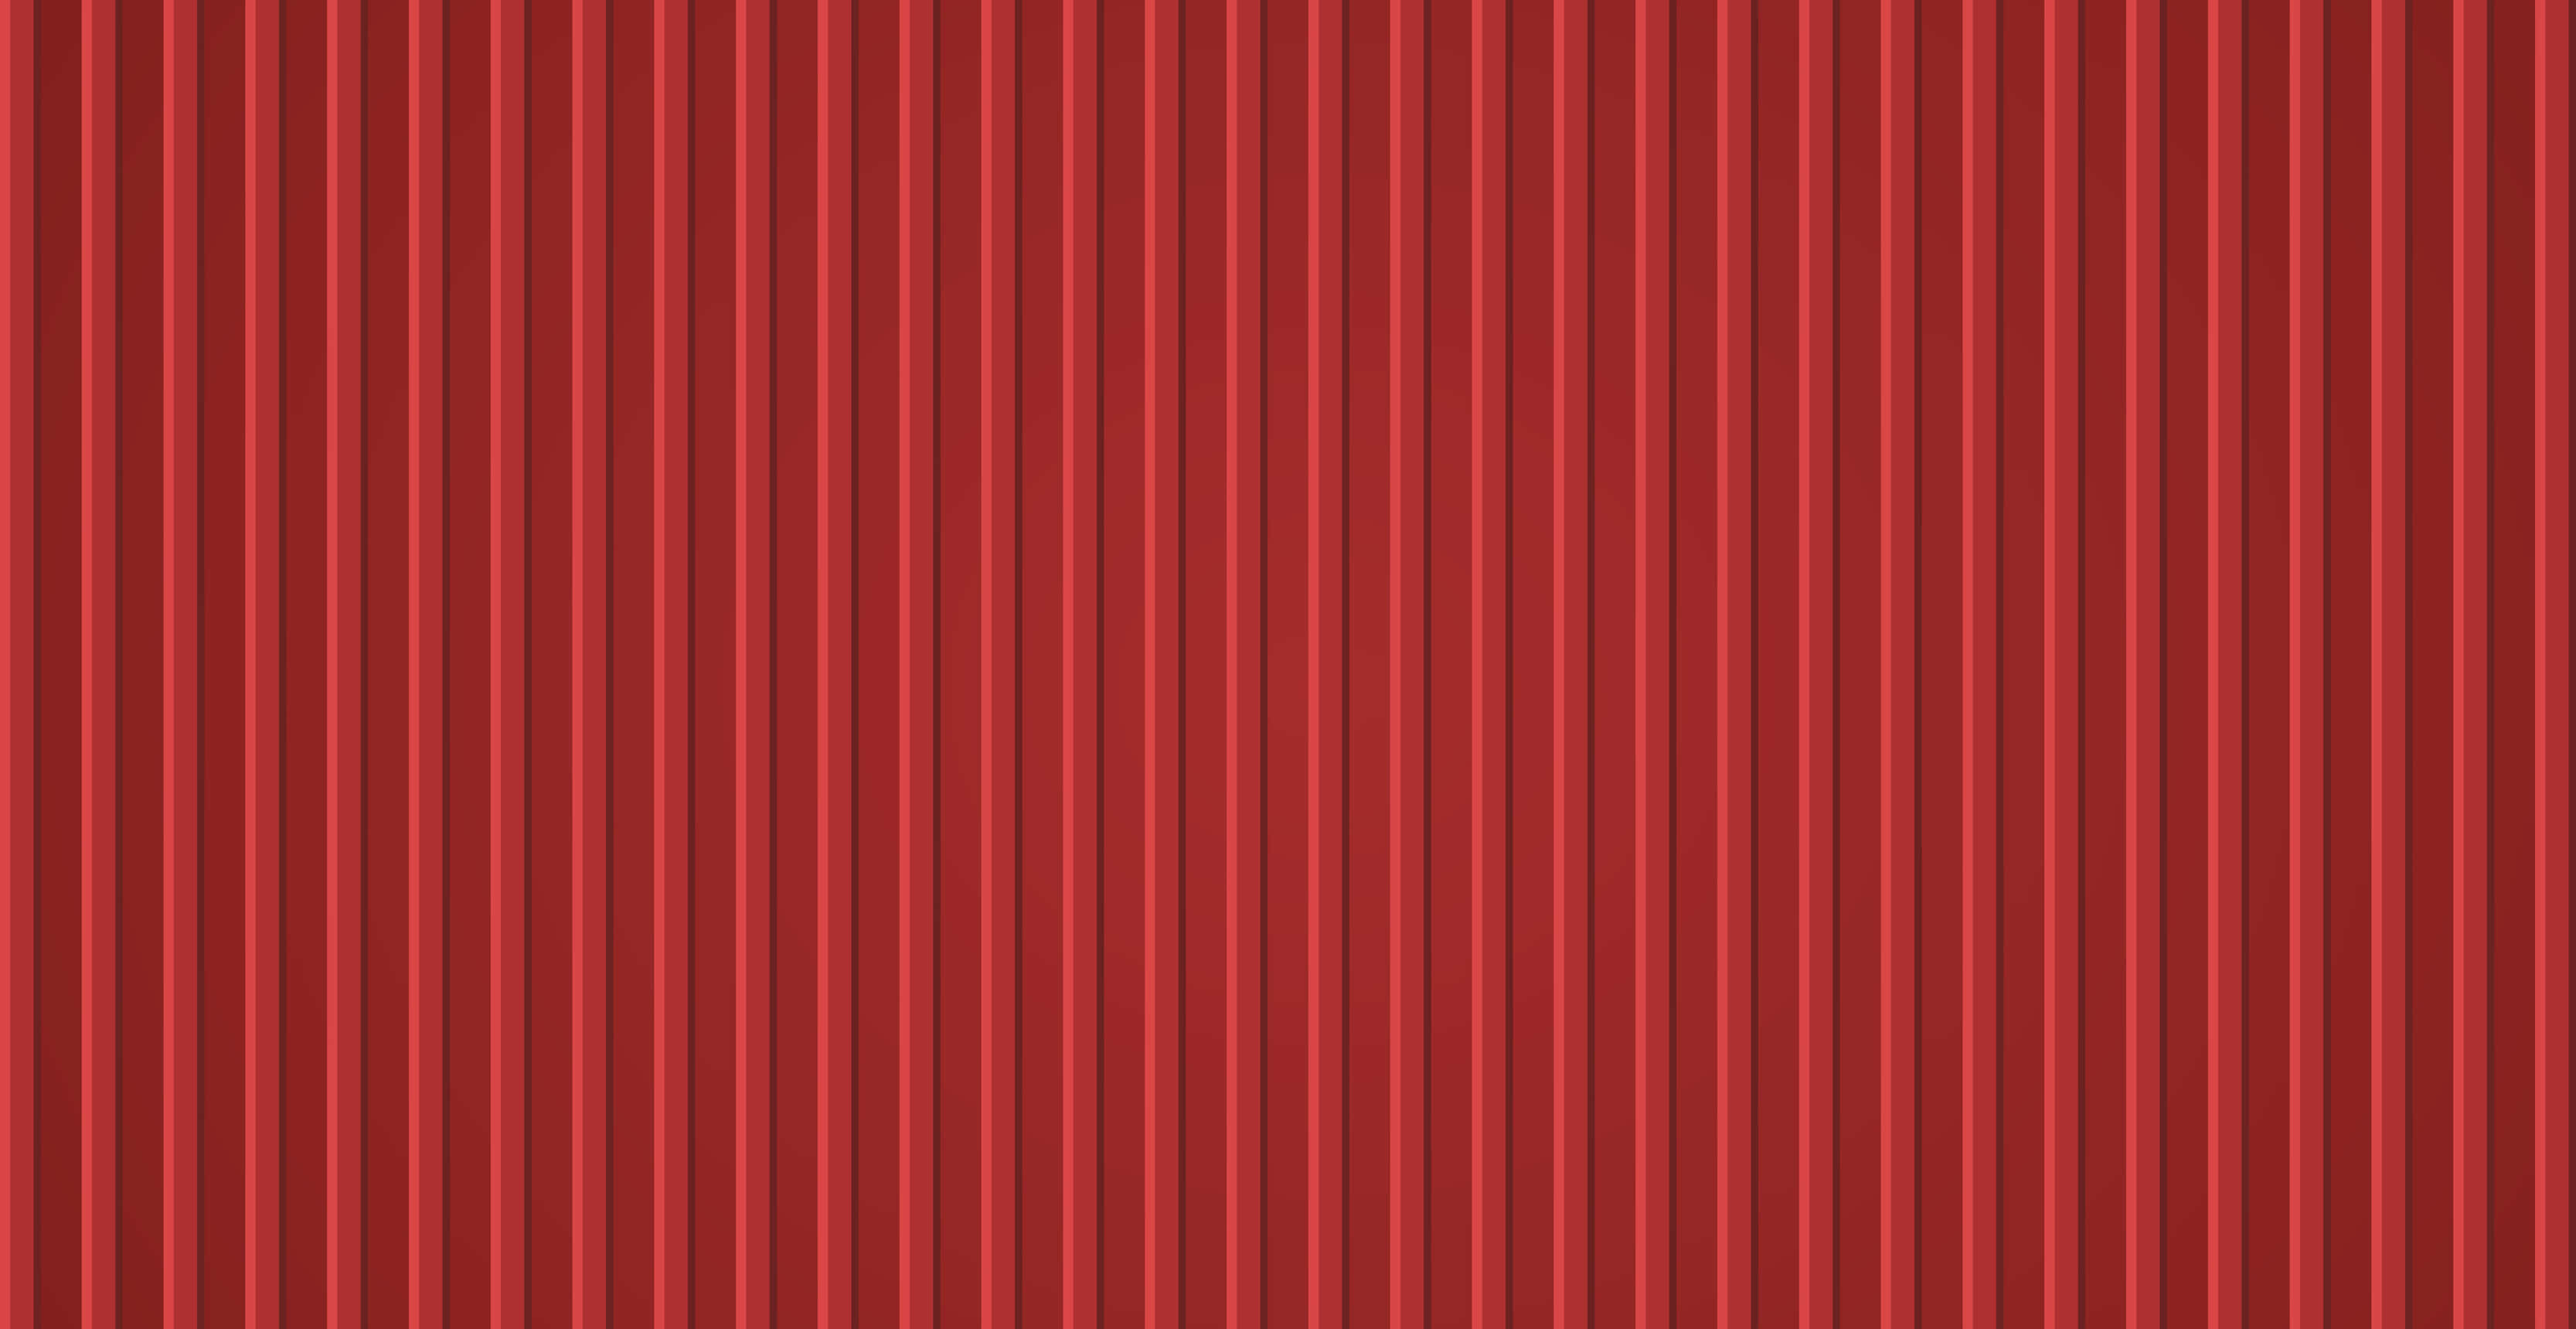 Striking Solid Red Background